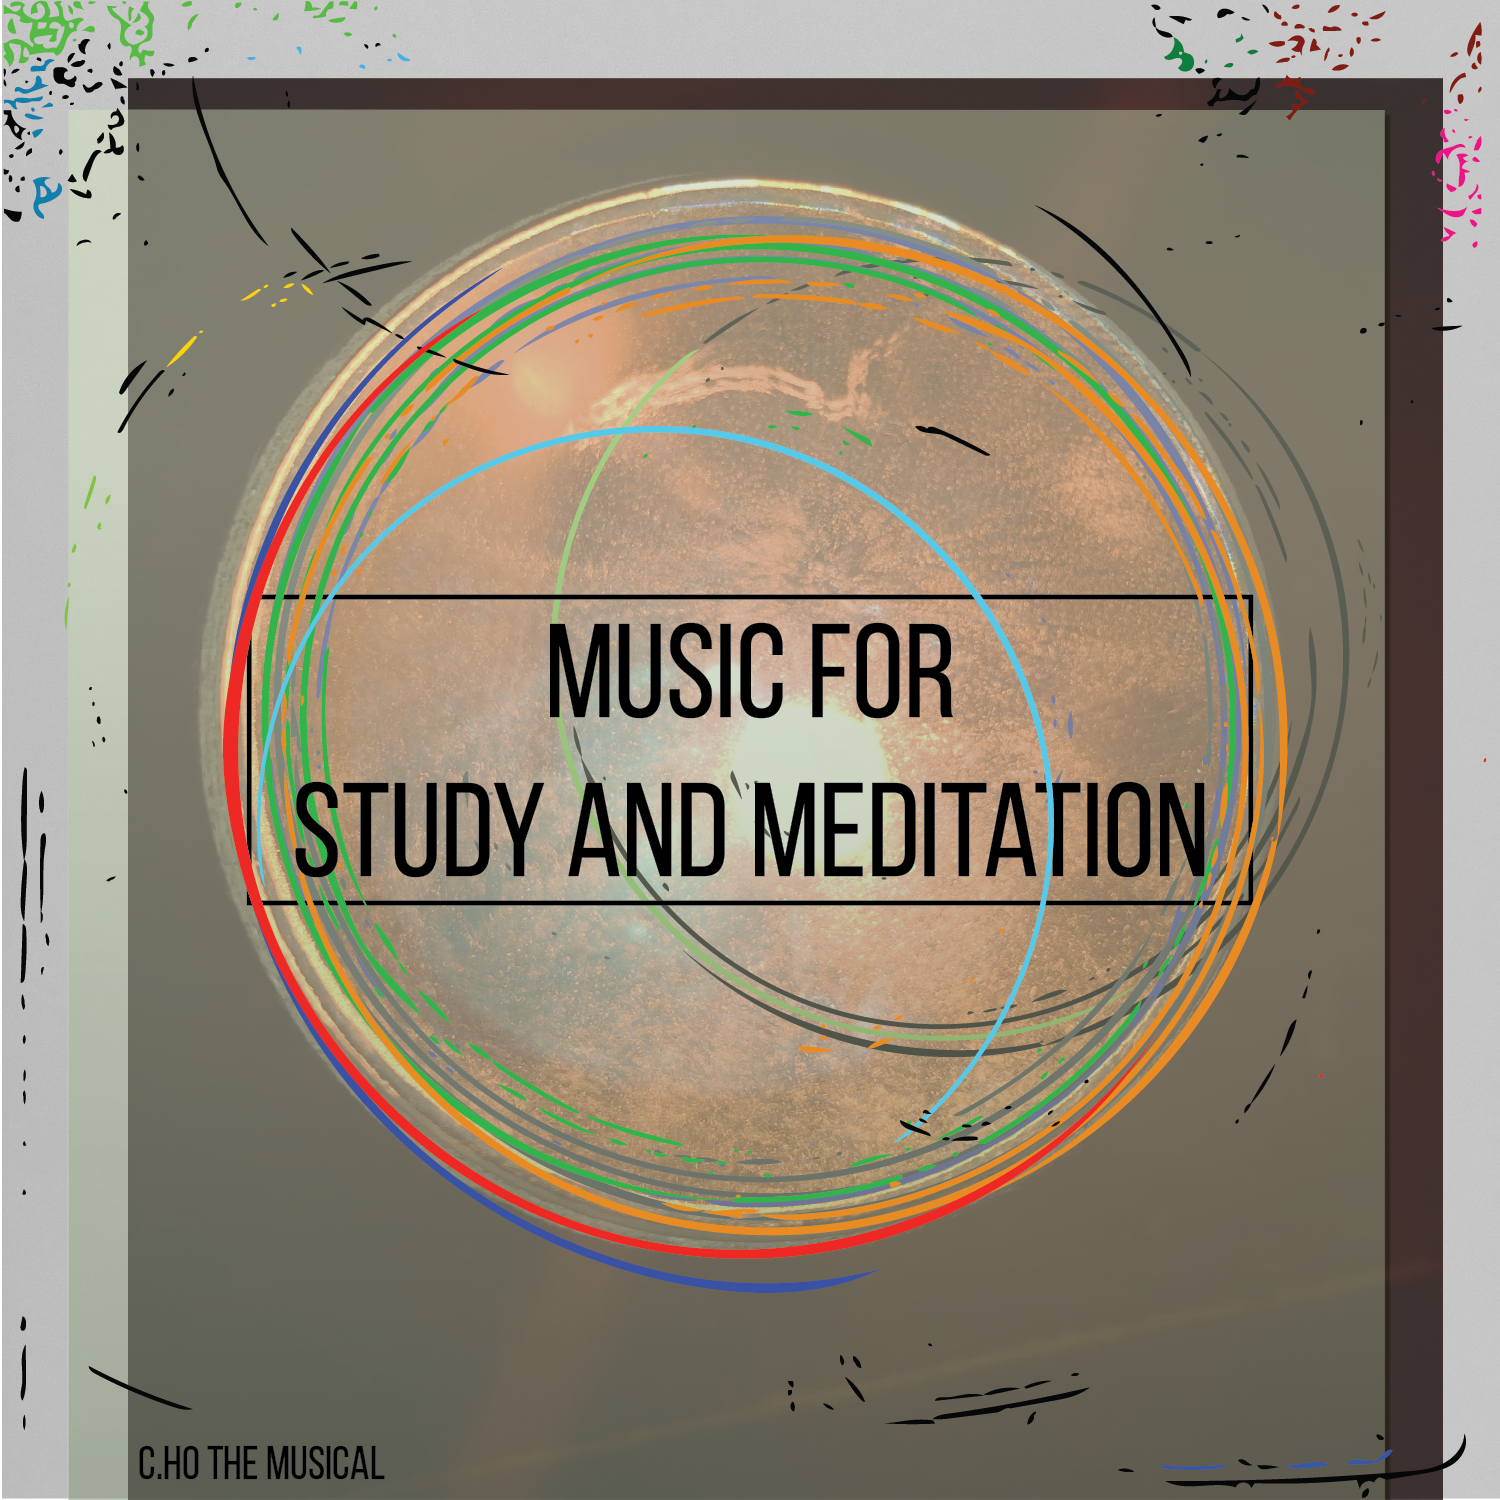 Music for Study and Meditation